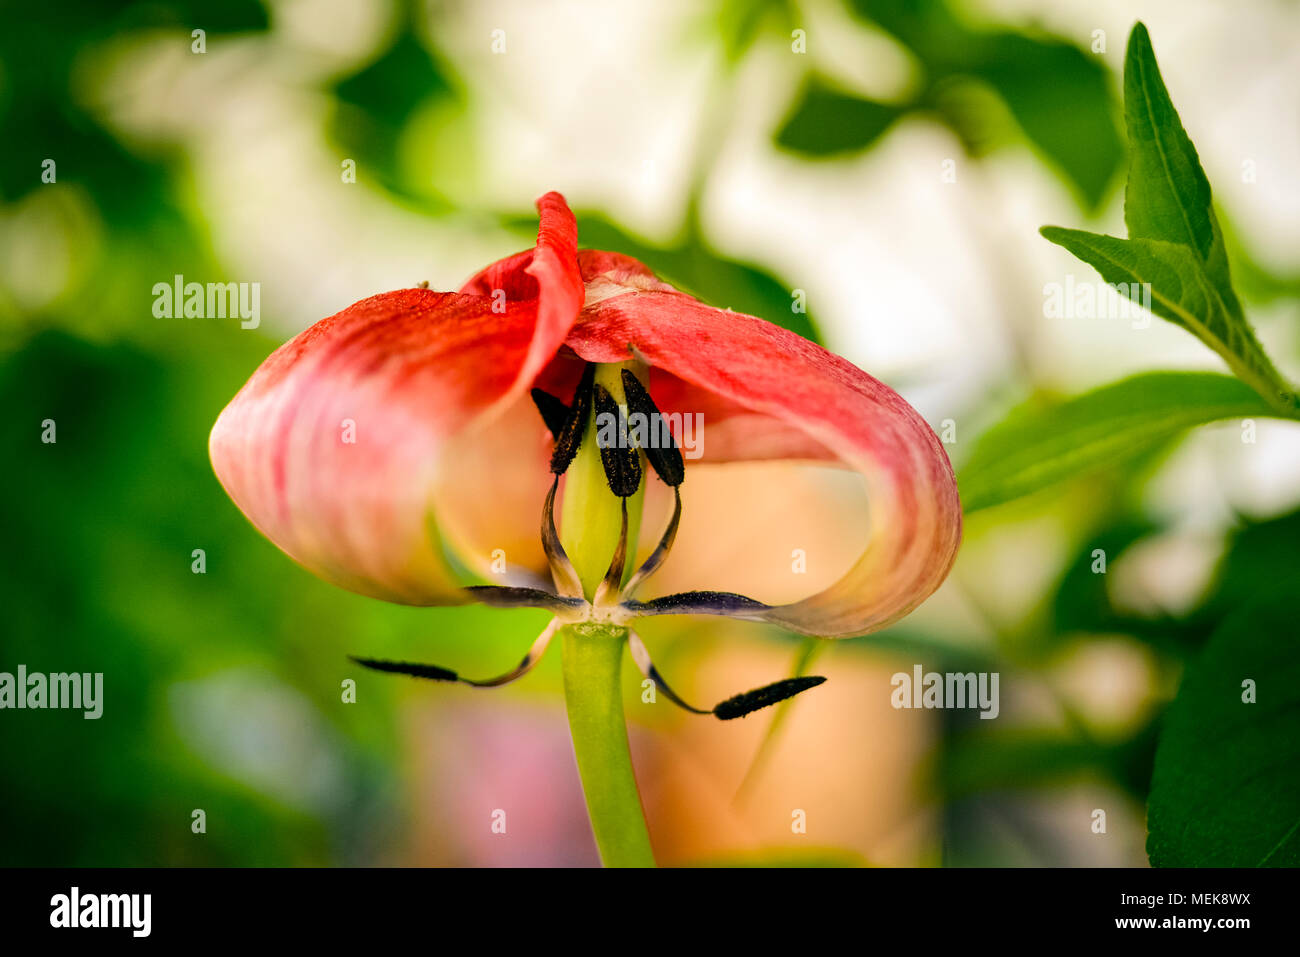 Life cycle of a tulip Stock Photo